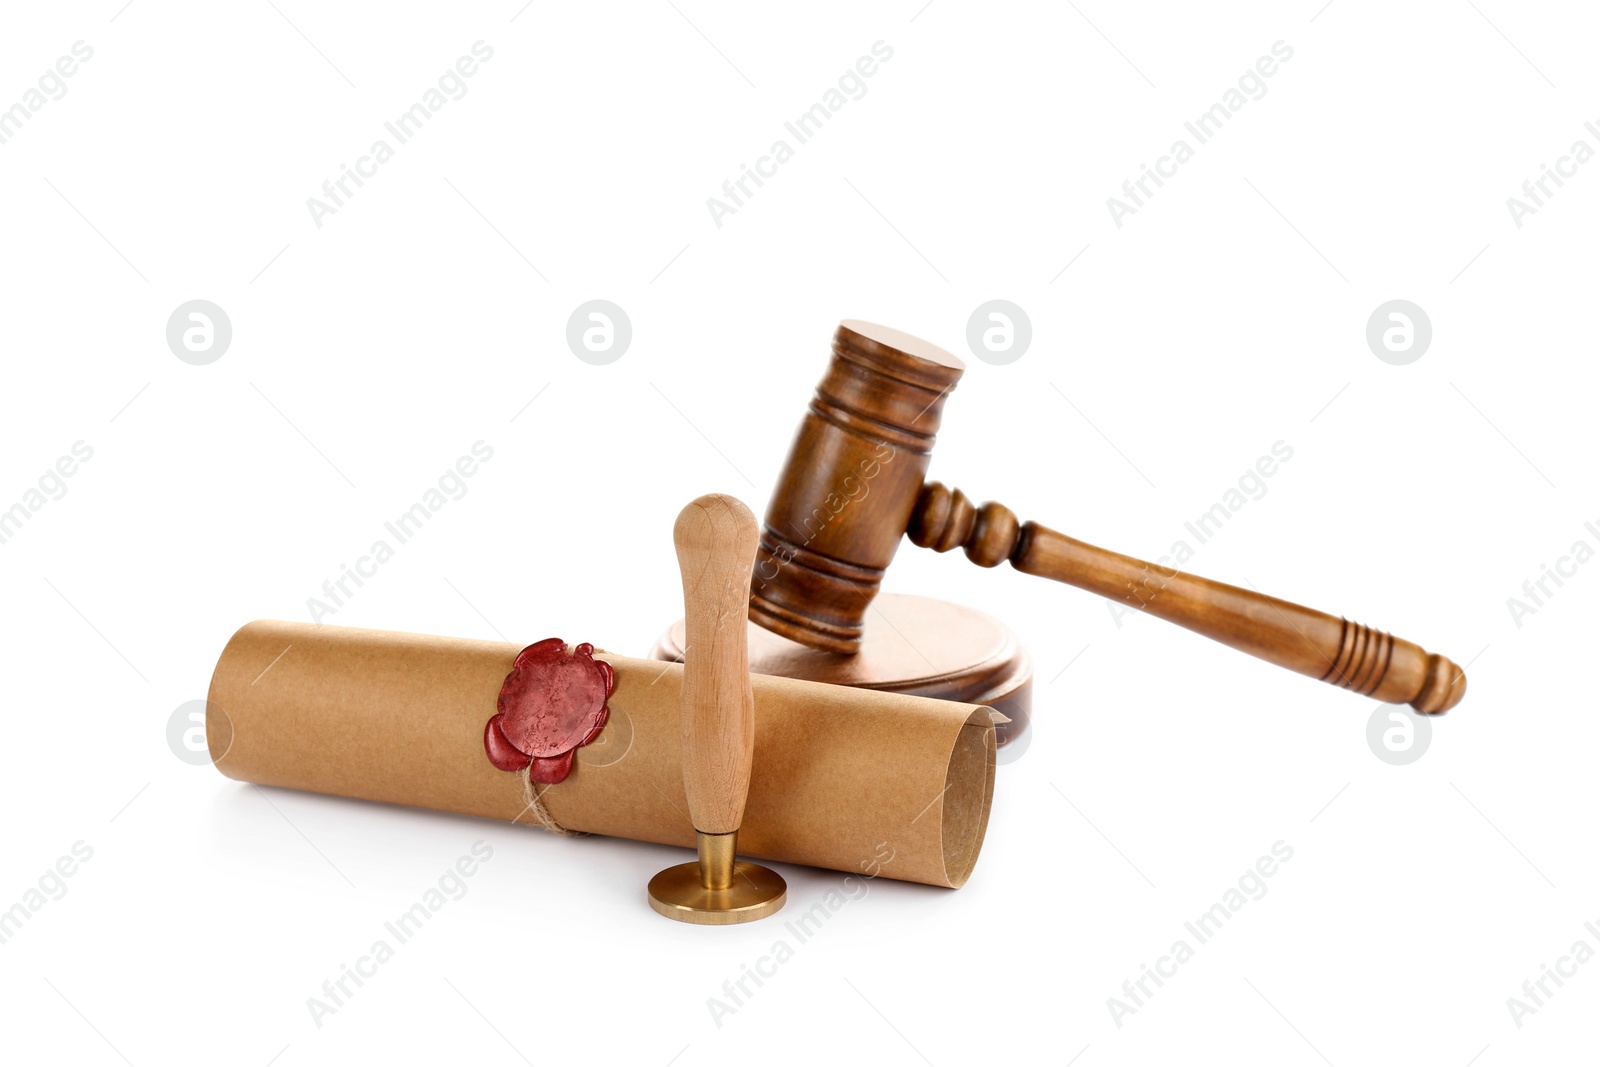 Photo of Notary's public pen, sealed document and gavel isolated on white